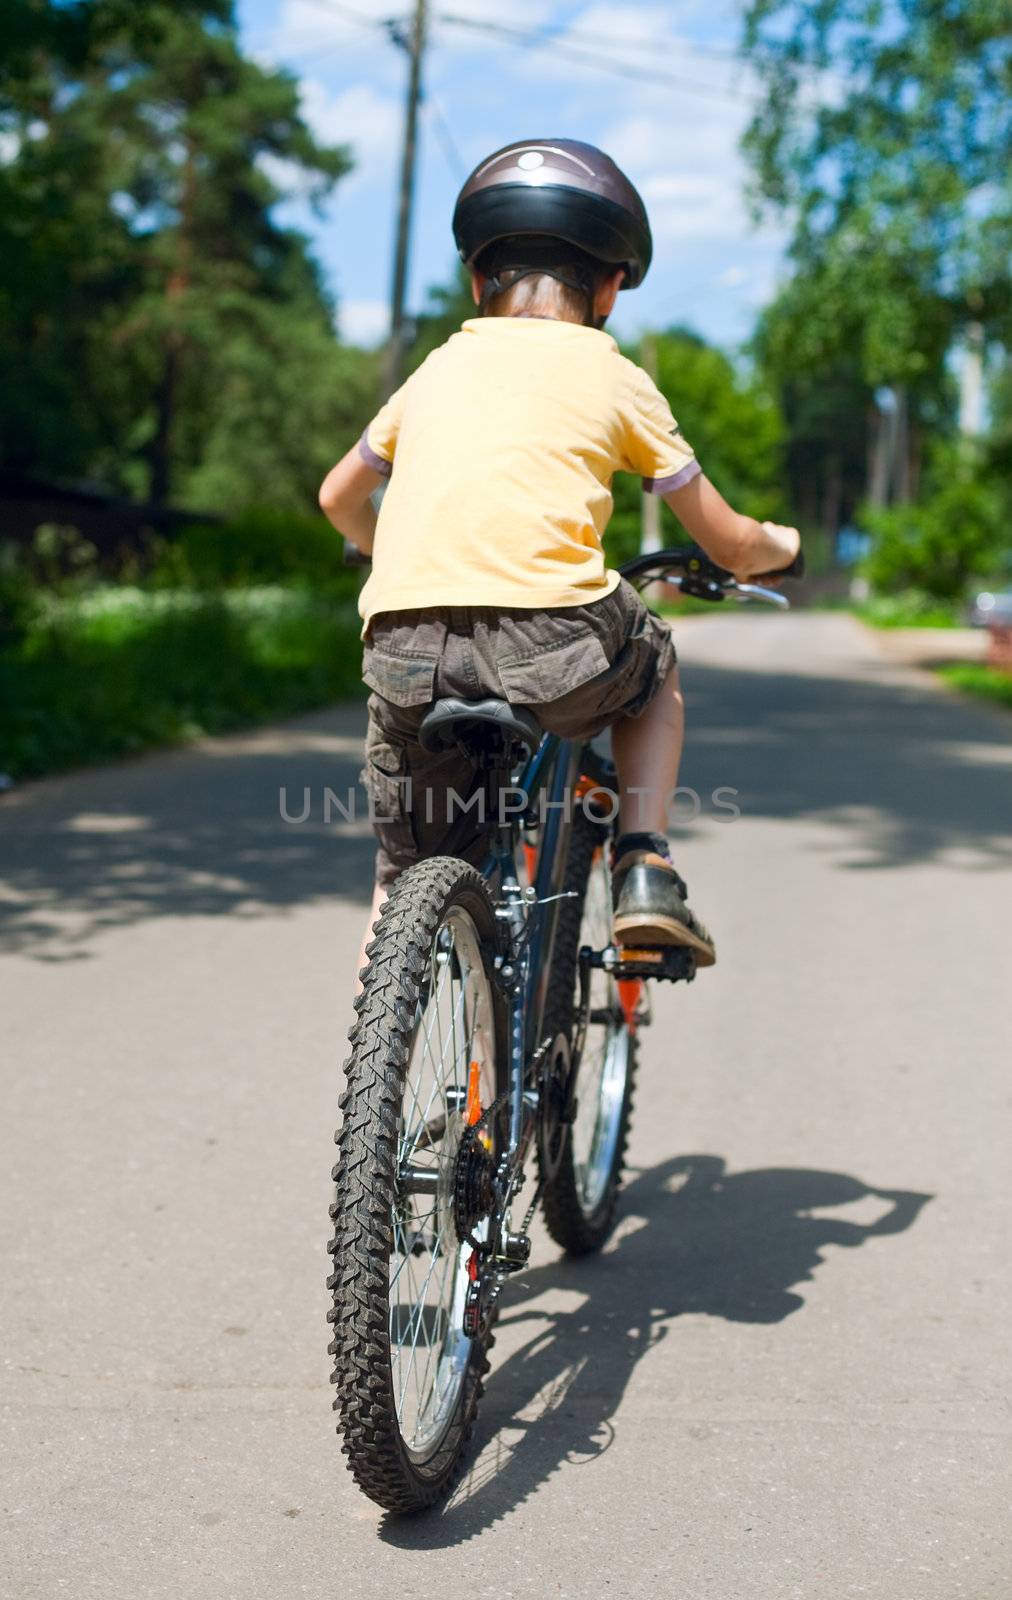 Young boy riding bicycle, shallow dof, focus on rear wheel